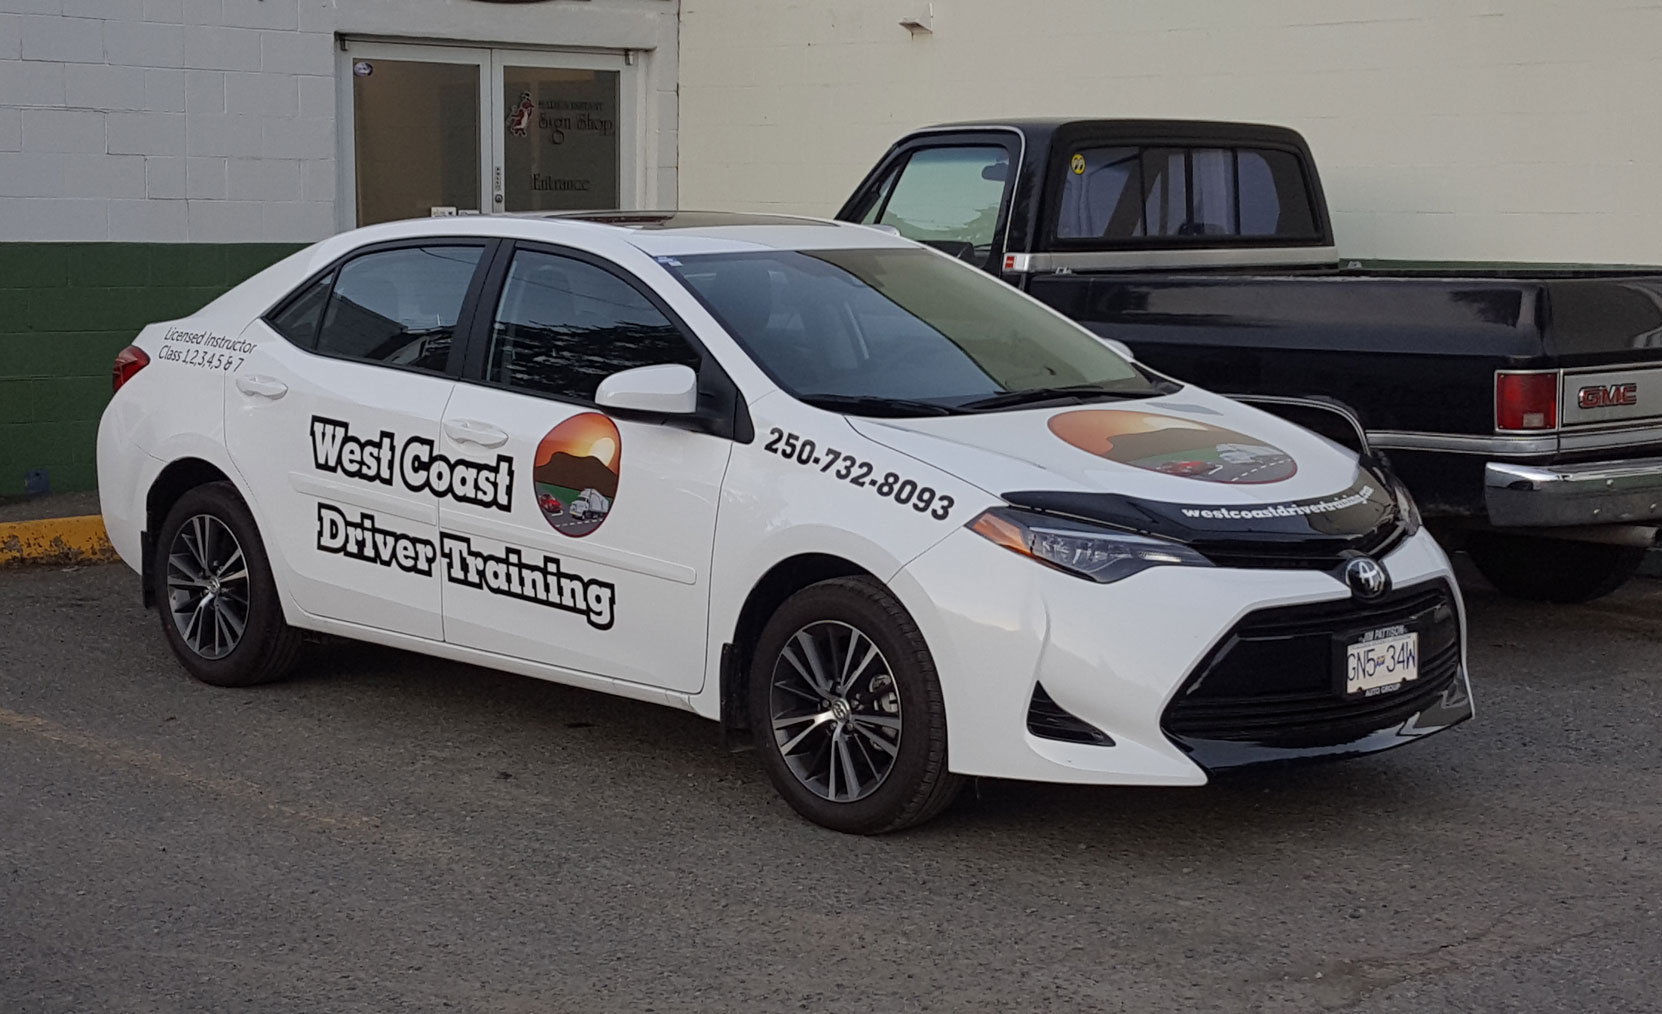 Our new 2018 Toyota Corolla with decals newly applied. (photo by West Coast Driver Training)